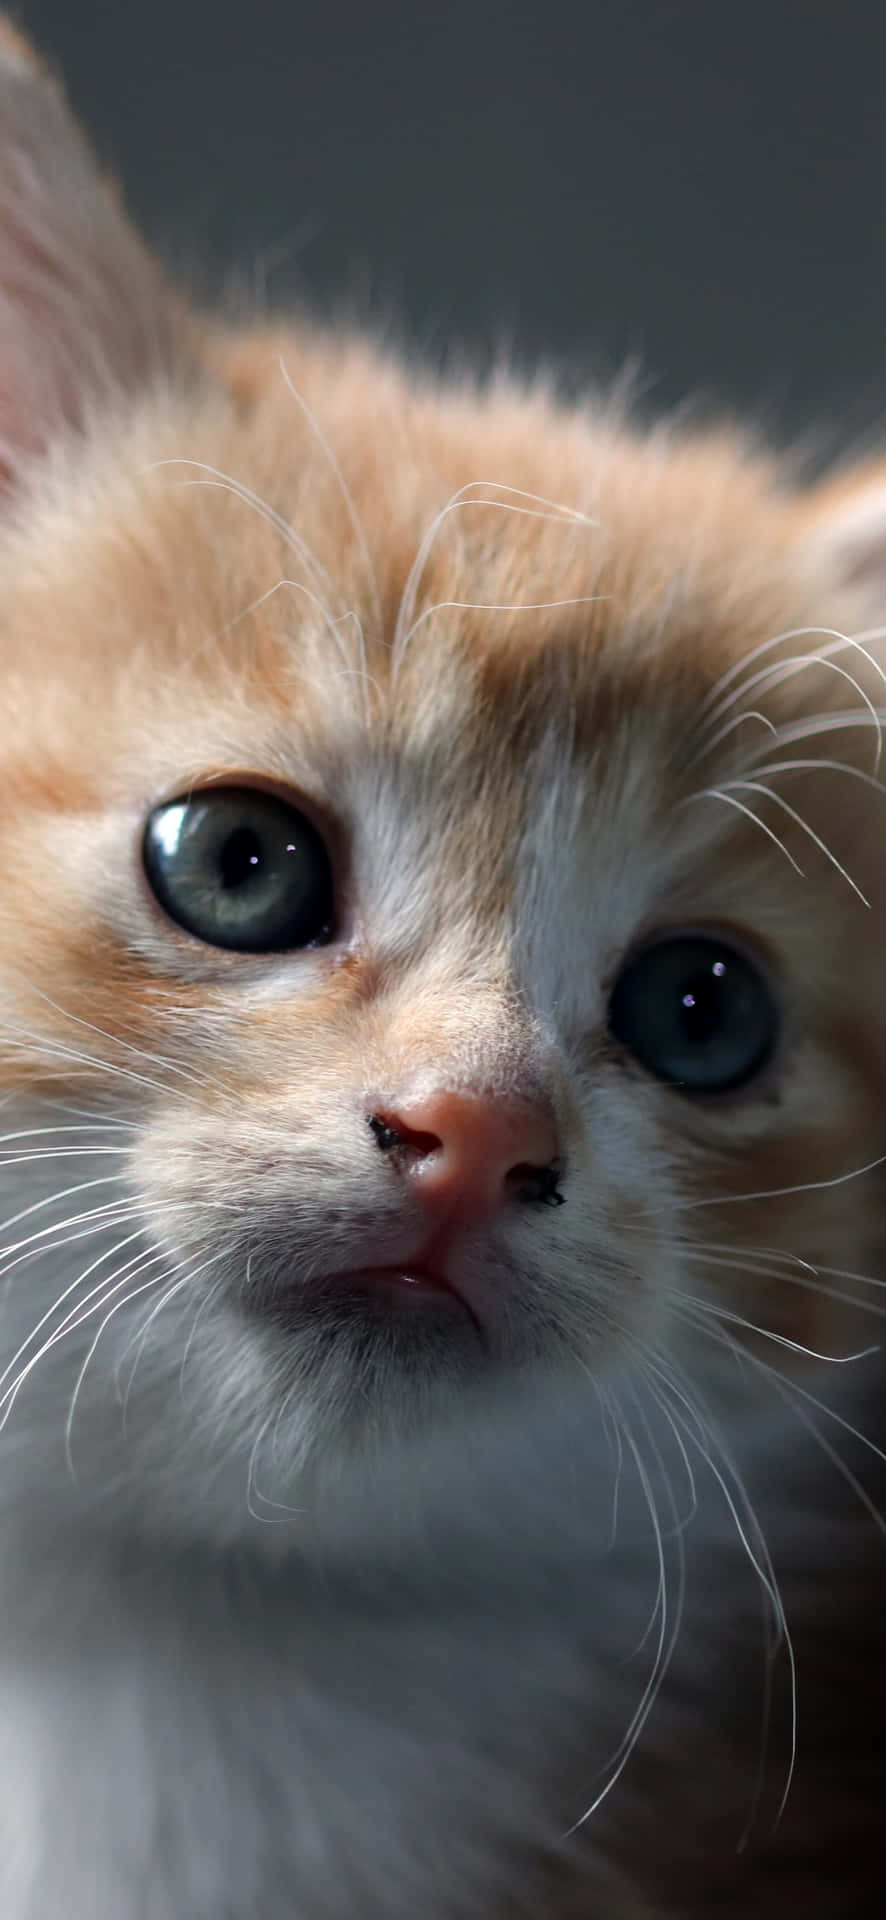 A Close Up Of An Orange Kitten Looking At The Camera Wallpaper